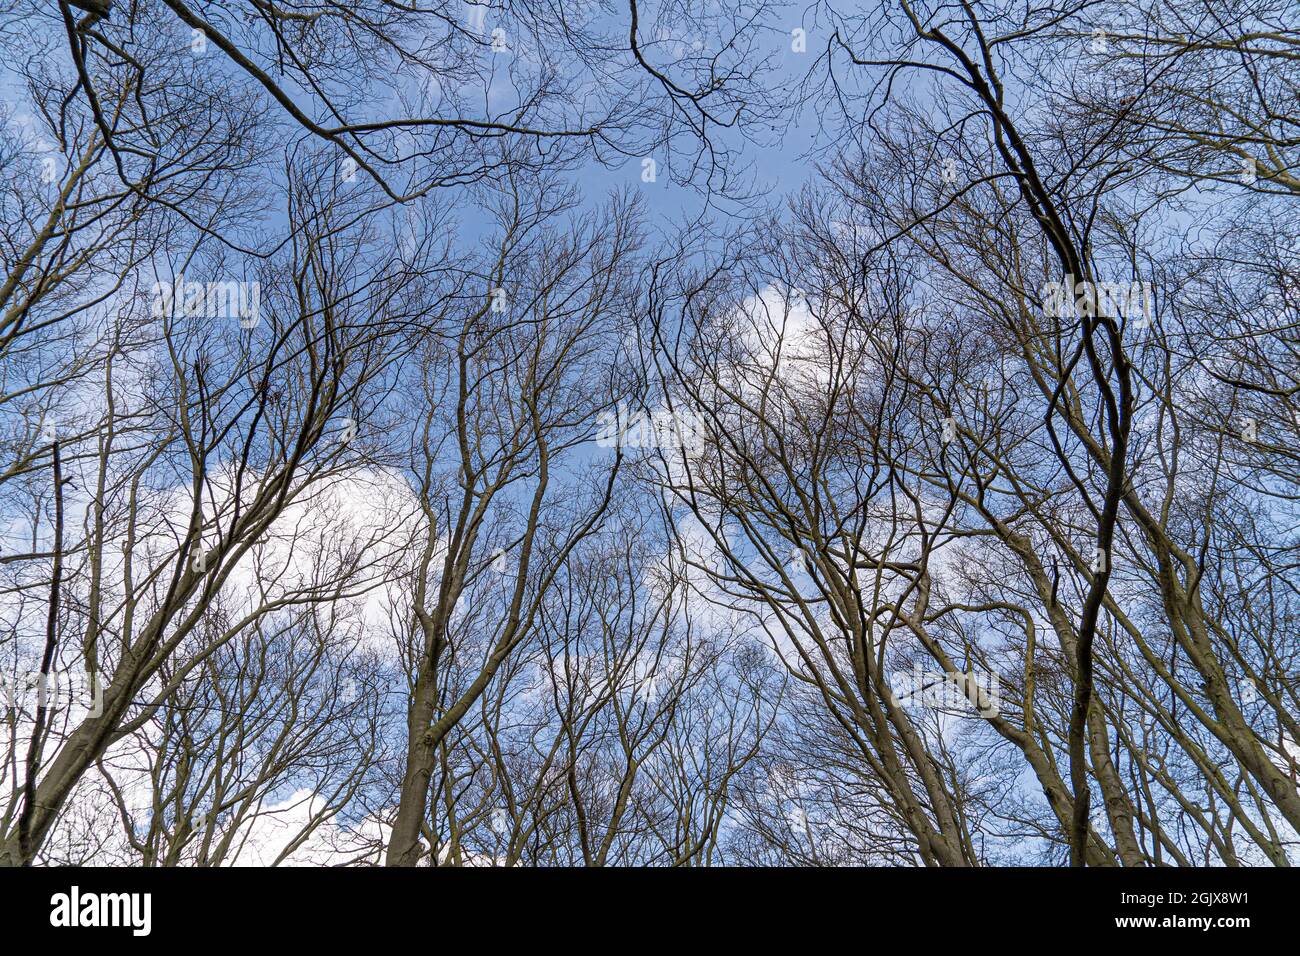 Up Tree view of beech tree against blue sky for natural layer nature texture backdrop wallpaper showing branches and twigs Silhouetted against bright Stock Photo